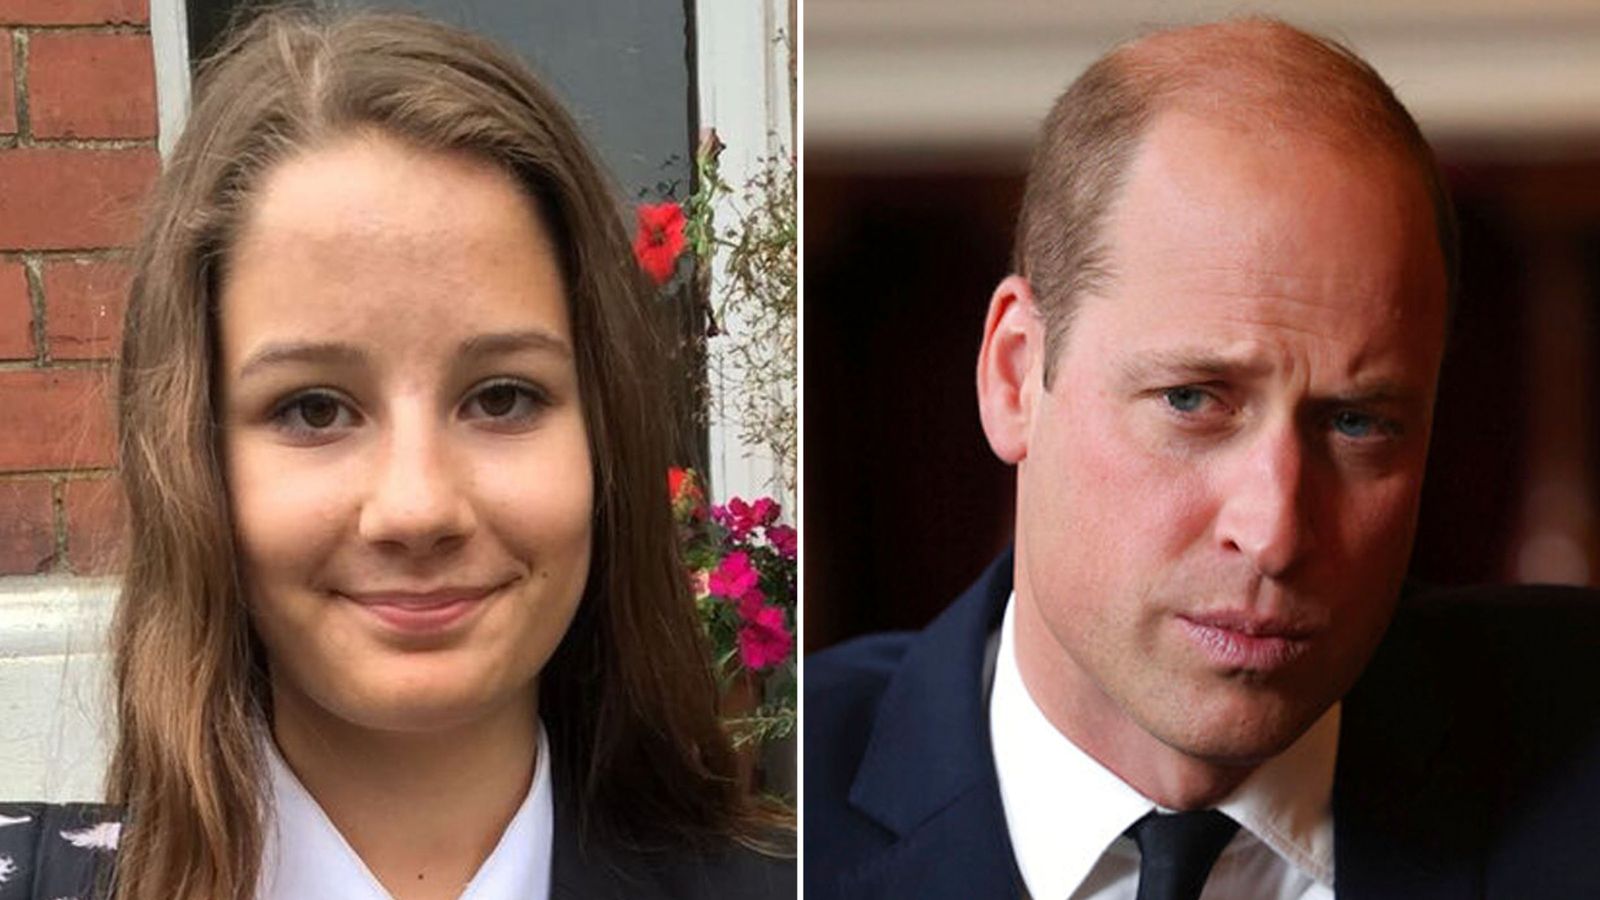 Prince William calls for improved online safety after coroner's ruling in Molly Russell death